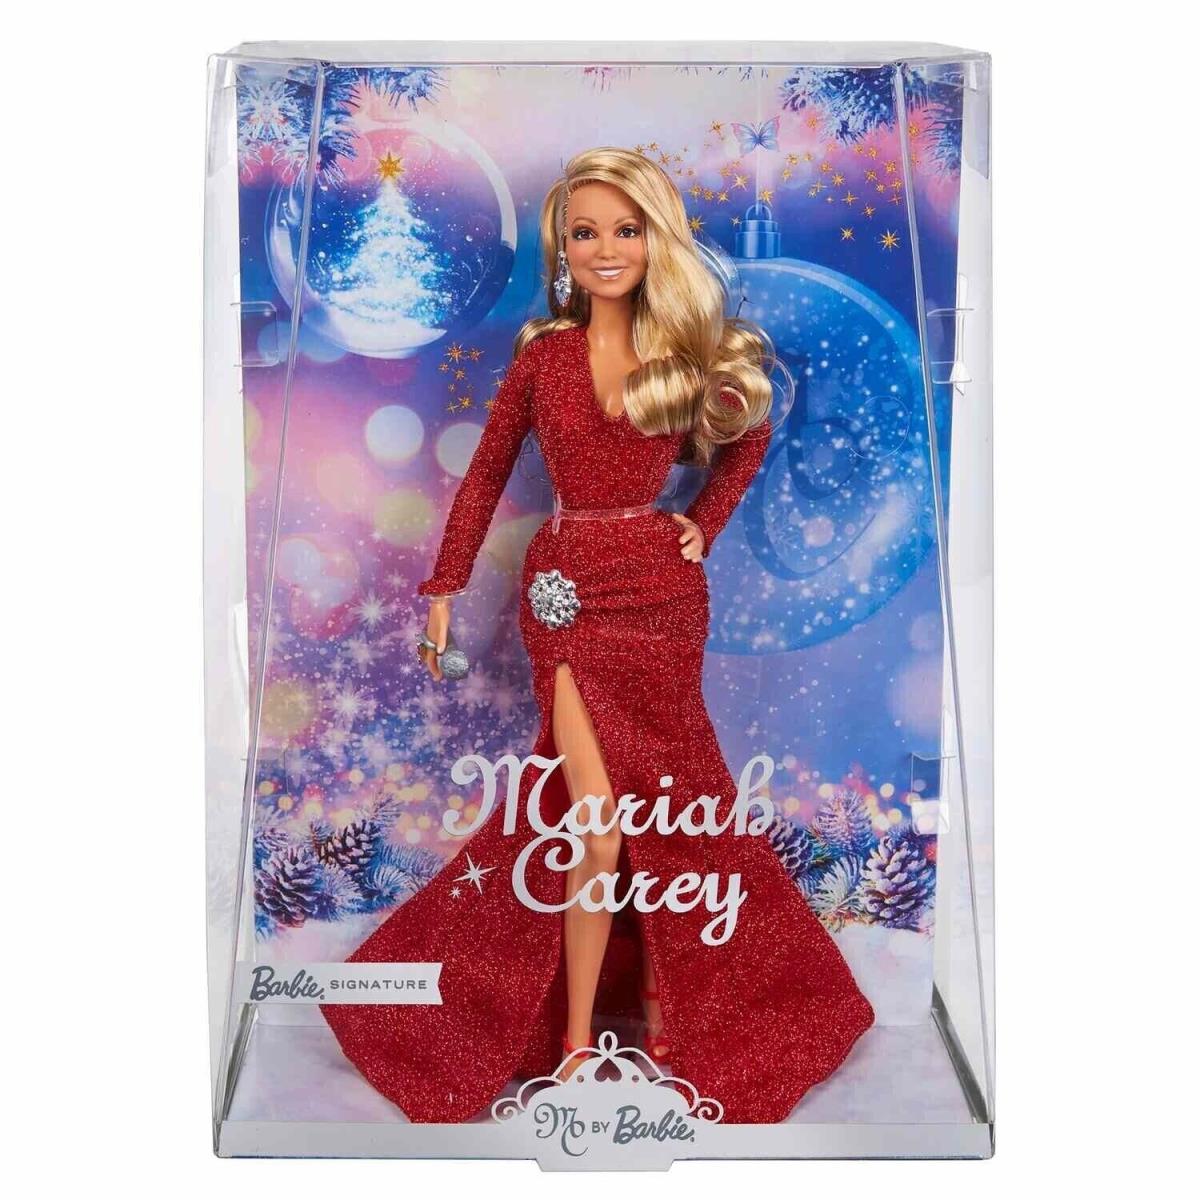 IN Hand Mariah Carey Holiday Christmas Signature Barbie in Red Dress - HJX17